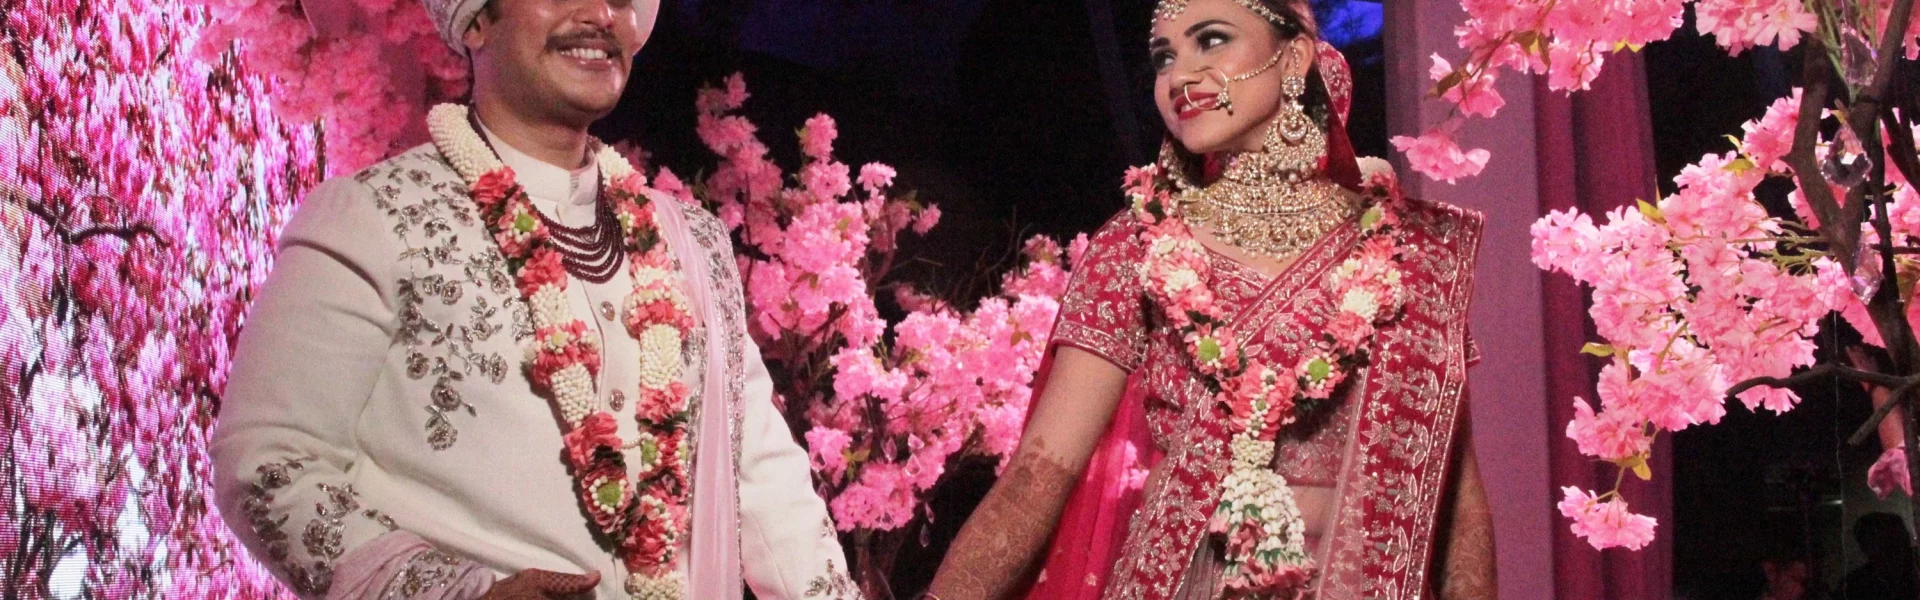 weddings in India: Indian couple exchanging garlands in a simple, eco-friendly wedding ceremony.